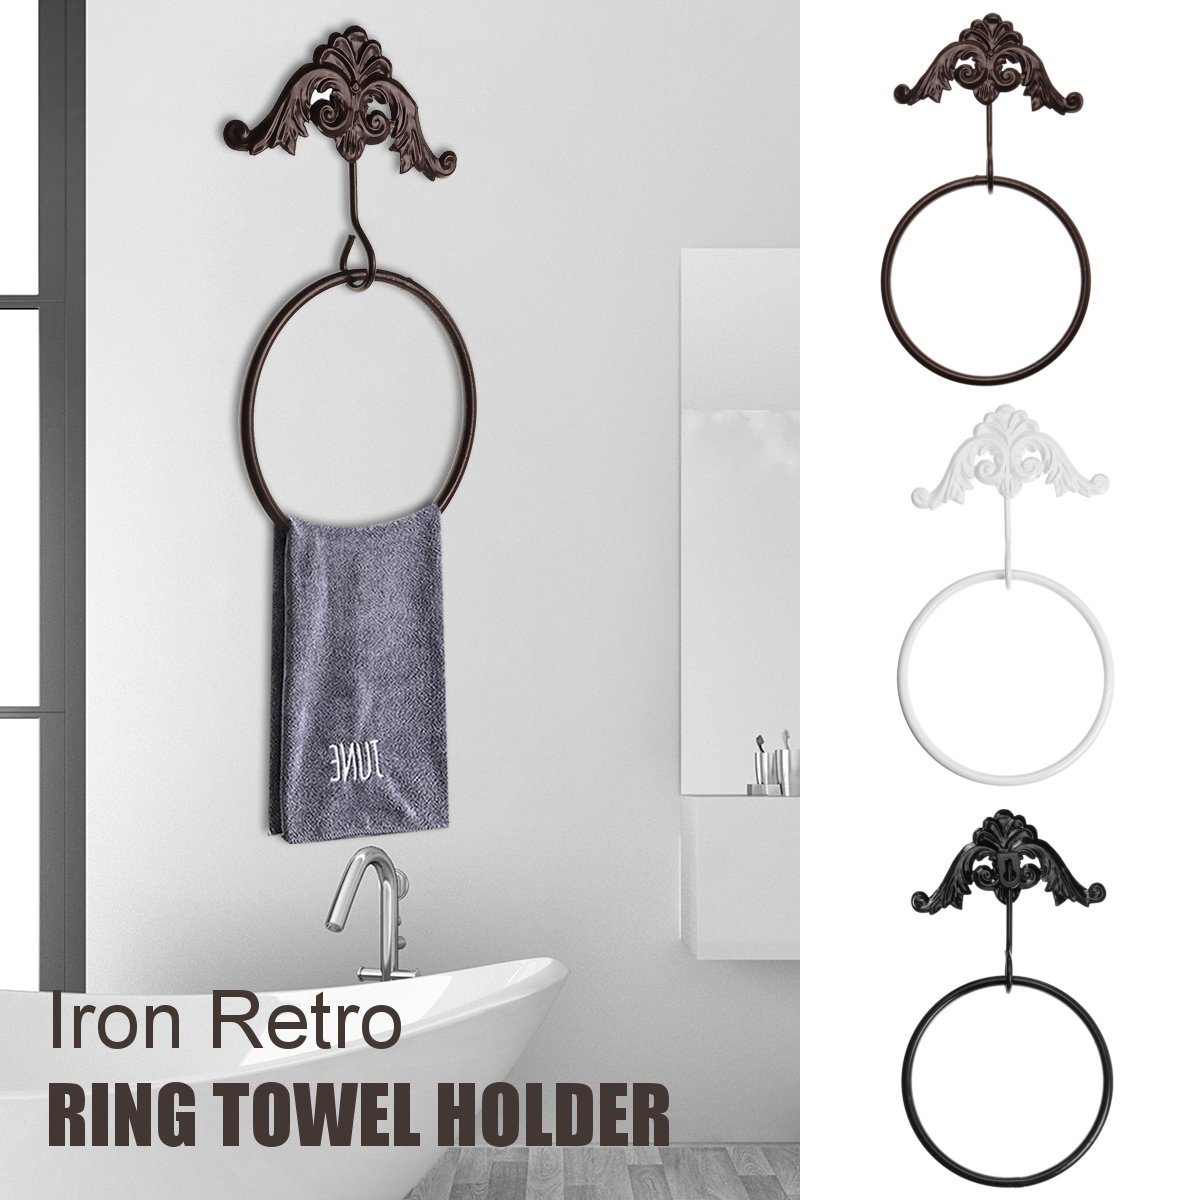 Stainless-Steel-Wall-Mounted-Bathroom-Toilet-Hand-Towel-Ring-Holder-1628709-1